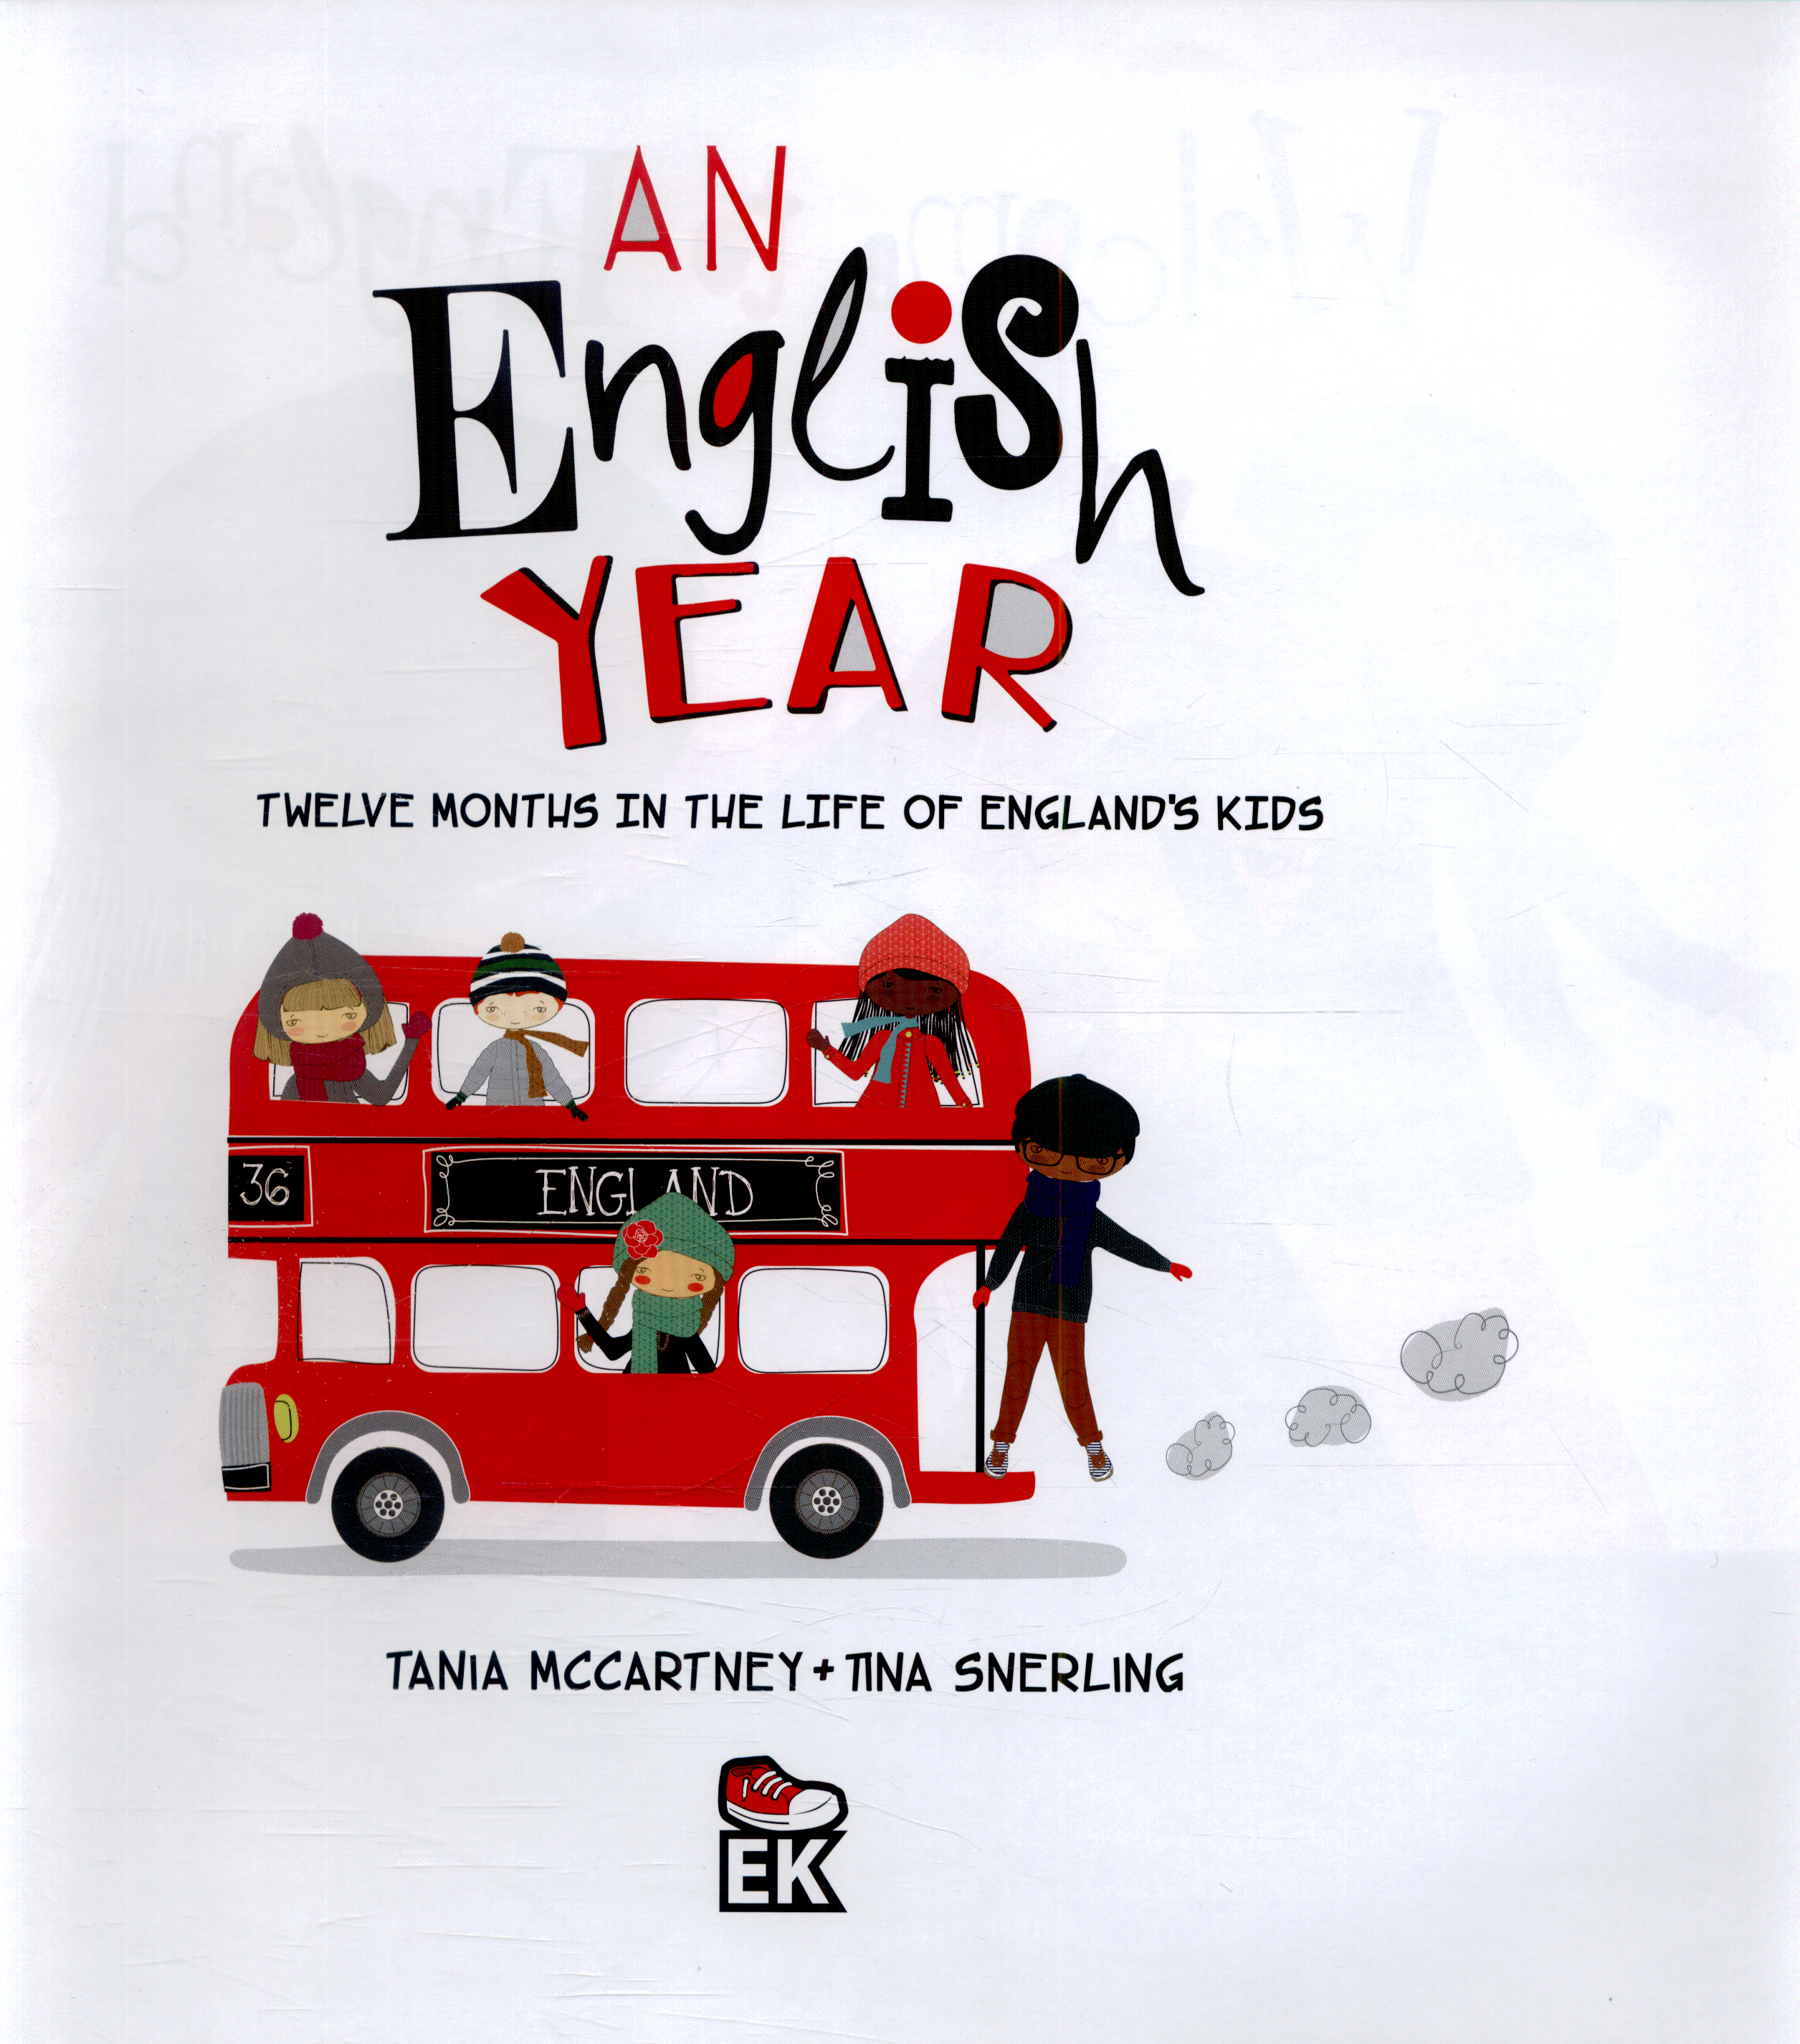 An English Year Kids' Year Twelve Months in the Life of England’s Kids 